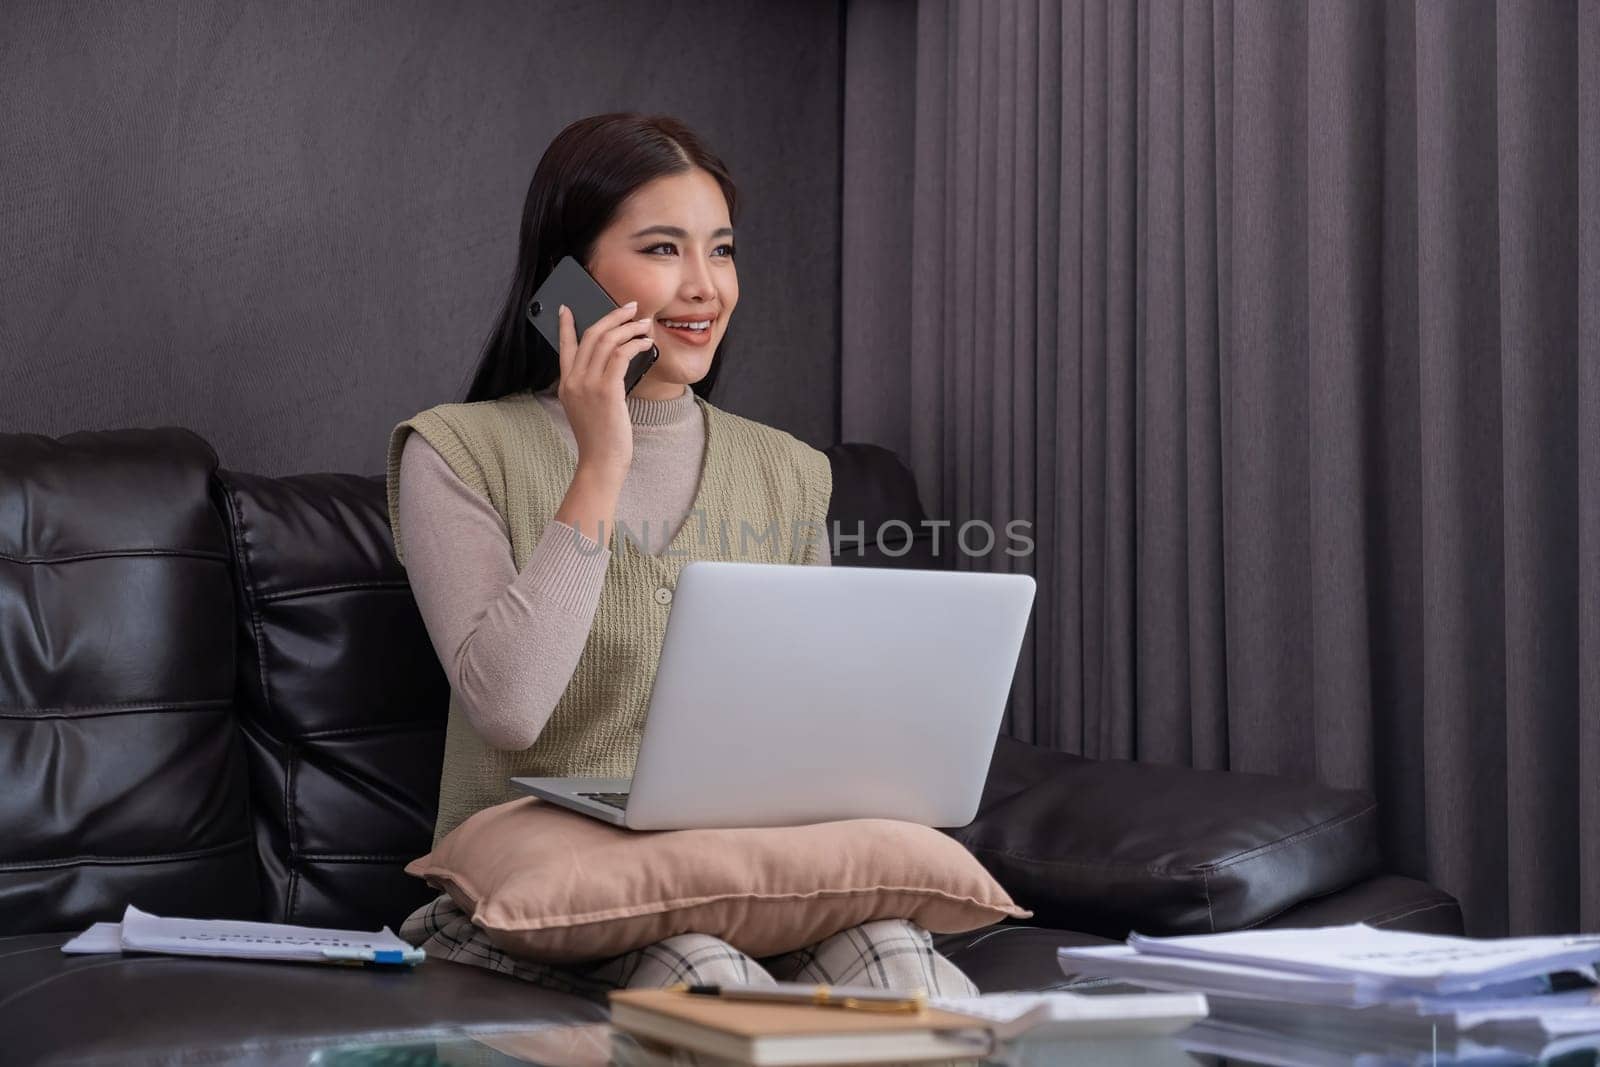 Woman Using Laptop and Smartphone on Sofa. Concept of multitasking and modern lifestyle..